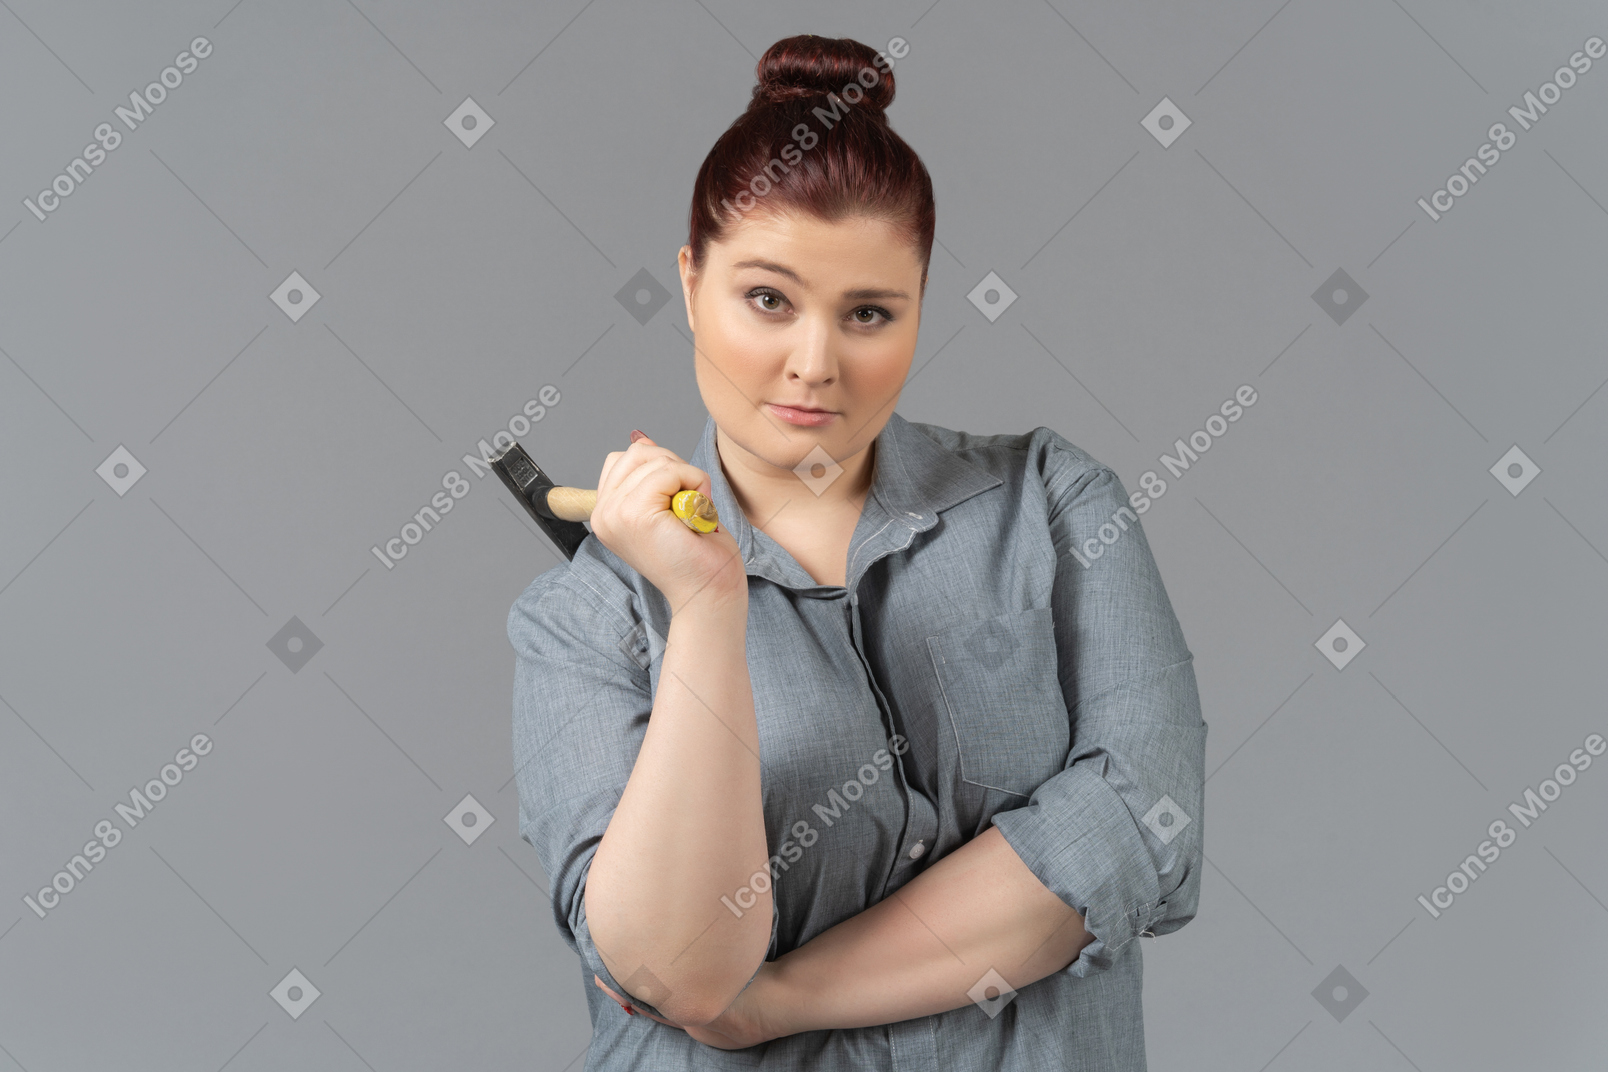 Woman looking sceptical at camera and holding a hammer